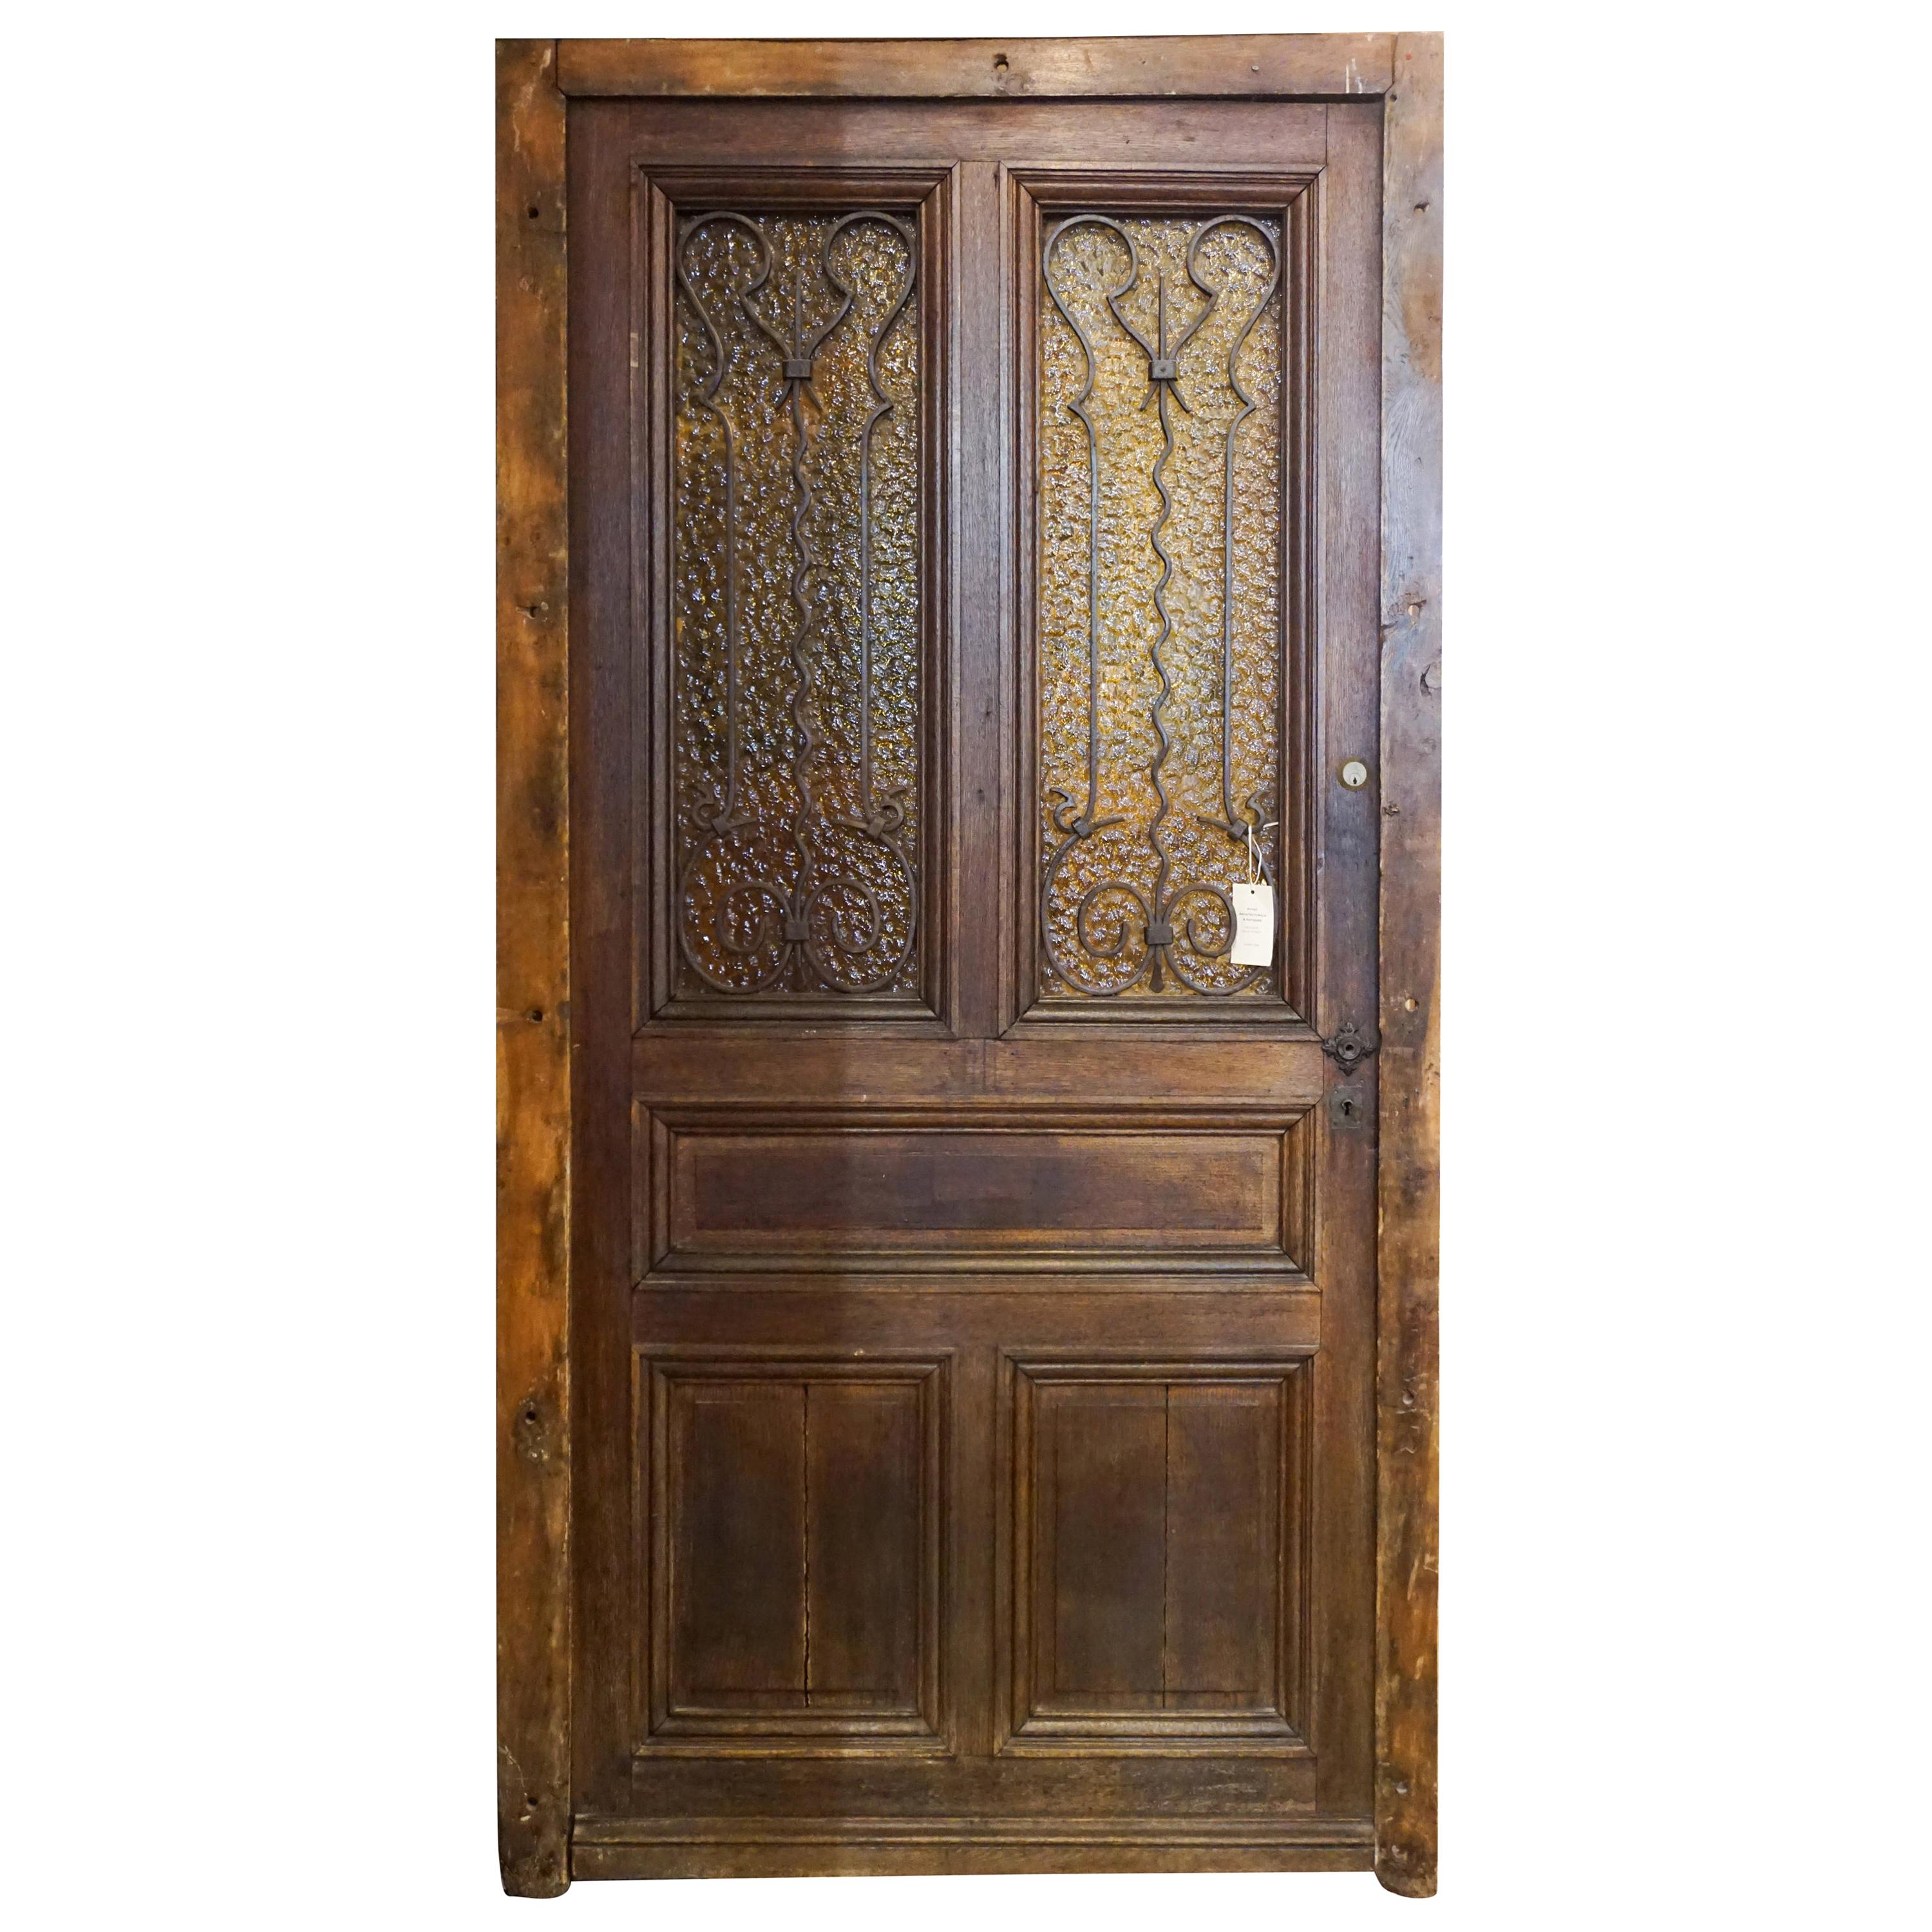 Entry Door with Tinted Textured Glass, circa 1850